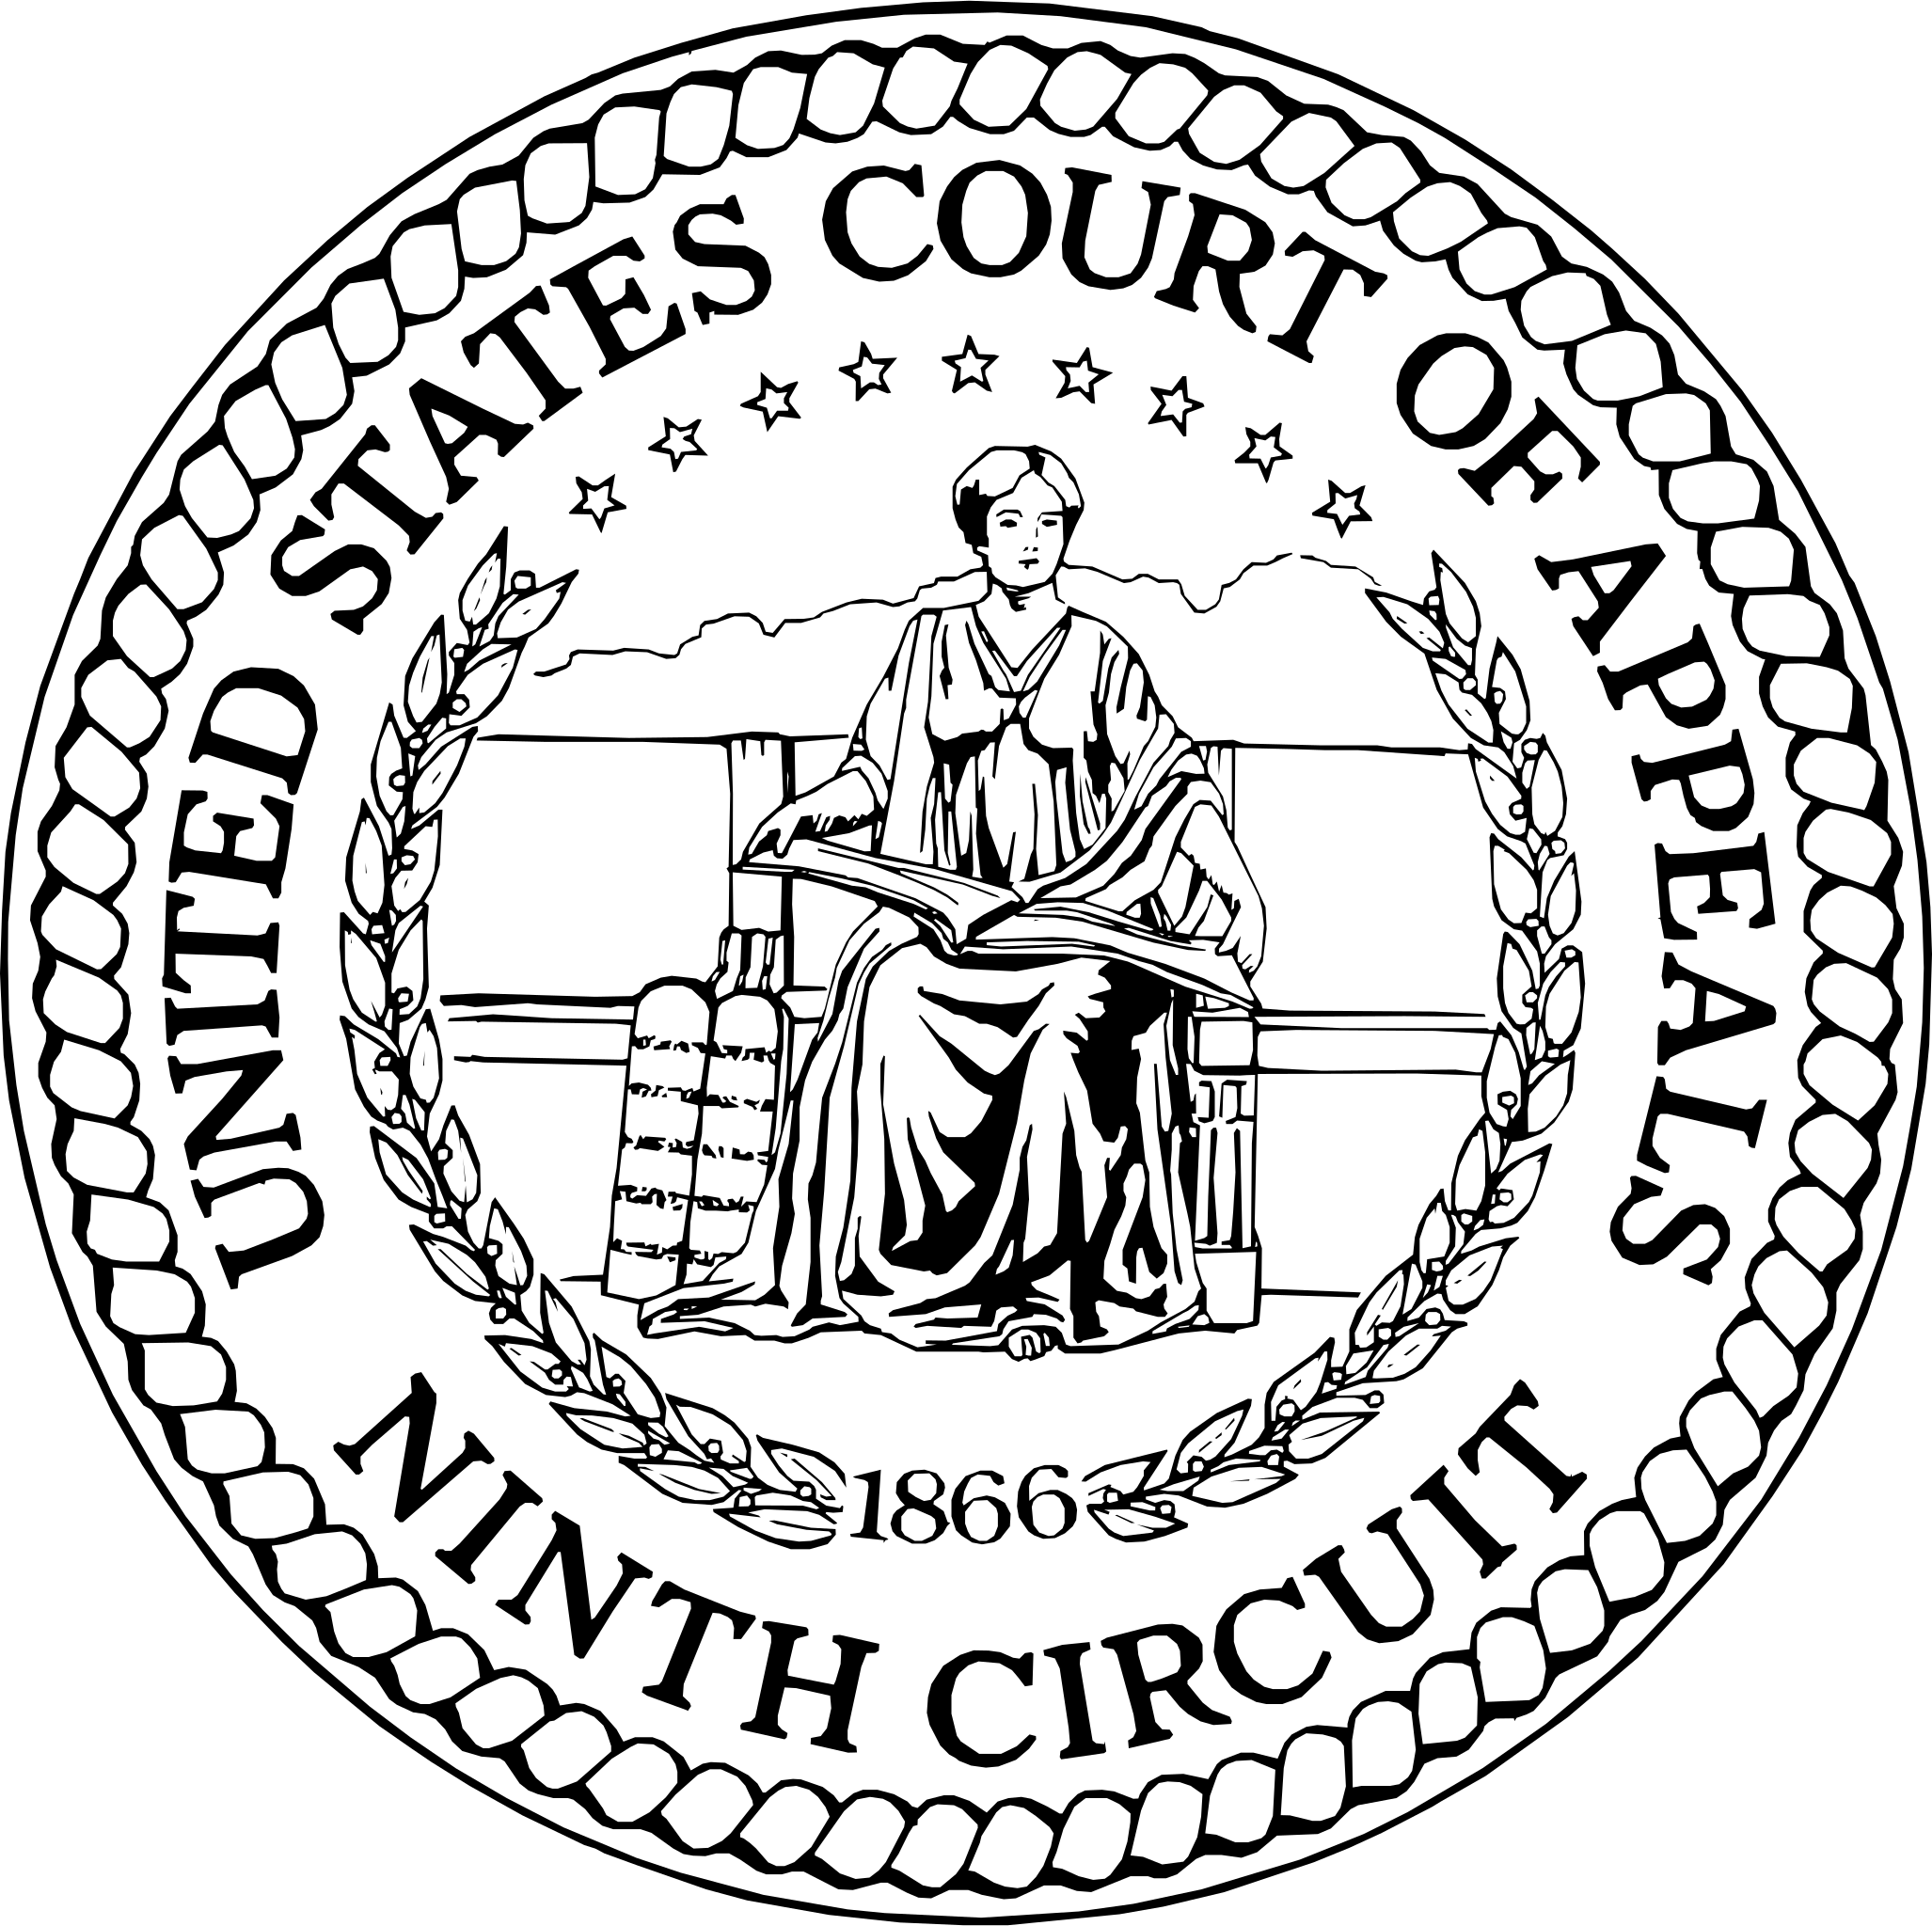 File:Seal of the United States Court of Appeals for the Ninth Circuit.svg -  Wikipedia